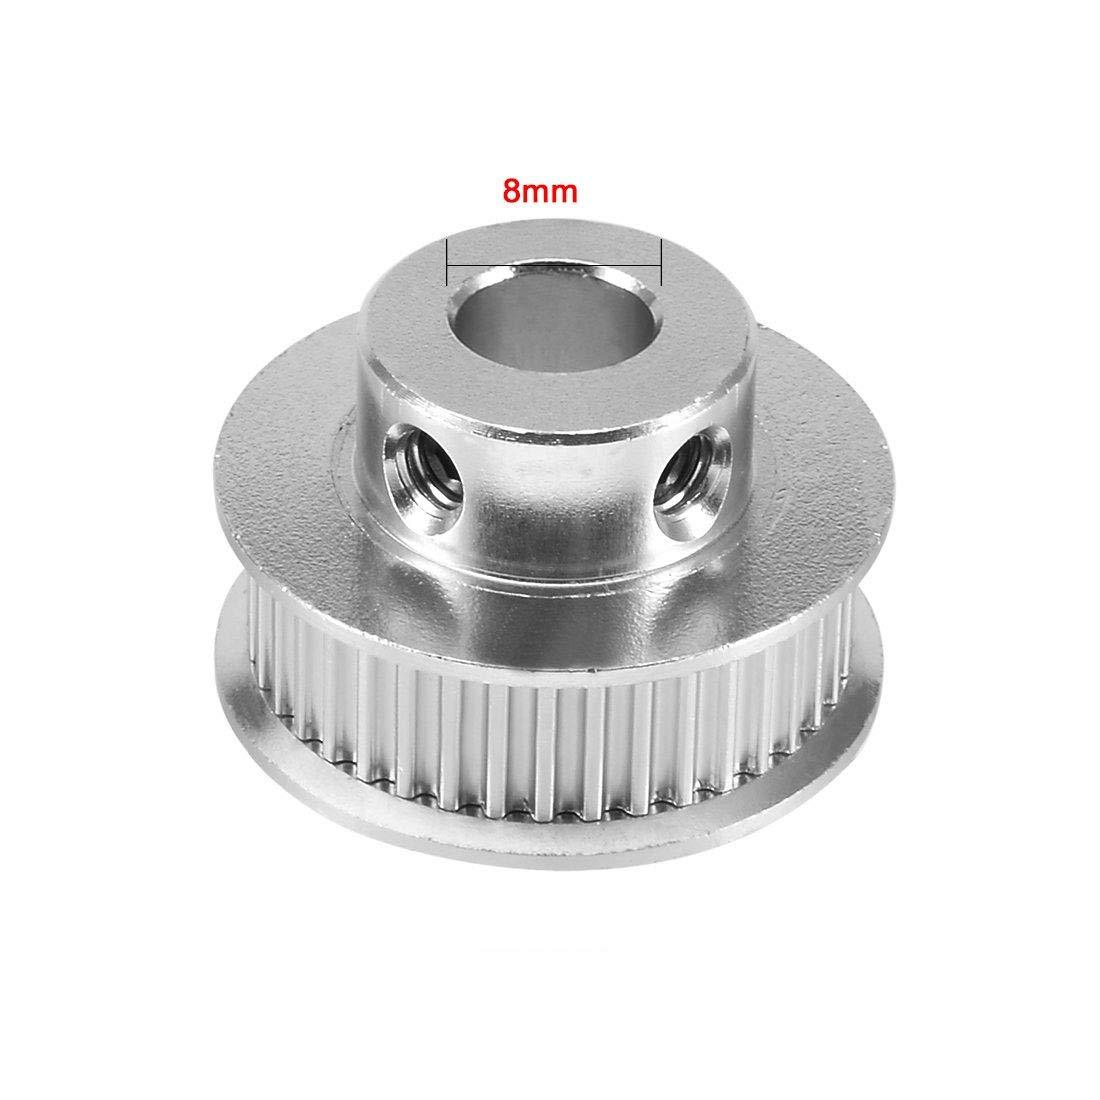 GT2 40/60 Teeth Bore Timing Belt Pulley Synchronous Wheel Aluminum Width 5mm, 6mm, 6.35mm, 8mm (Pack of 3)